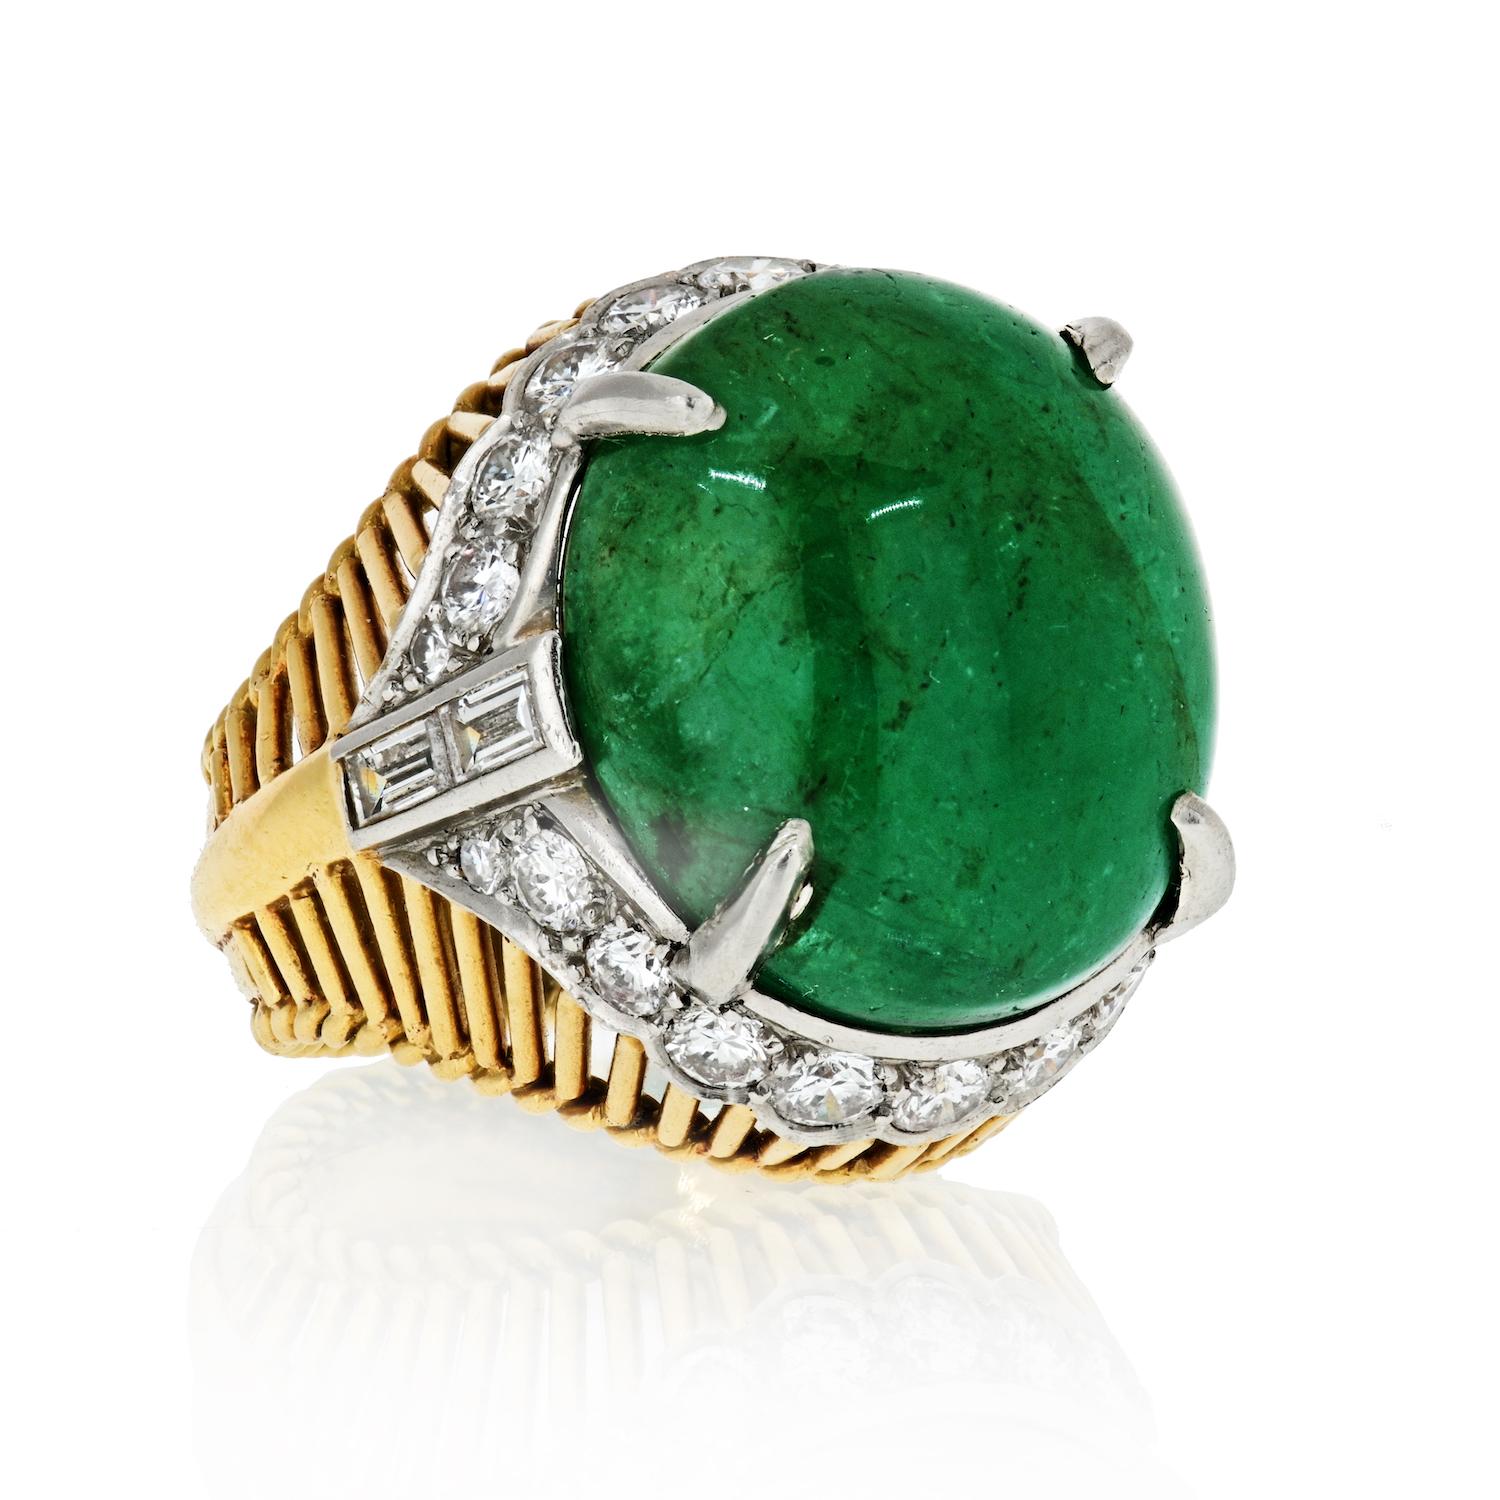 Questions? Call us anytime!
The Back Vault NYC.
833,998,2858

This Cartier 1960's cocktail ring features a 15-carat green cabochon-cut emerald with .65 carats of round and baguette diamond accents and is set in 18 karat yellow gold and platinum.